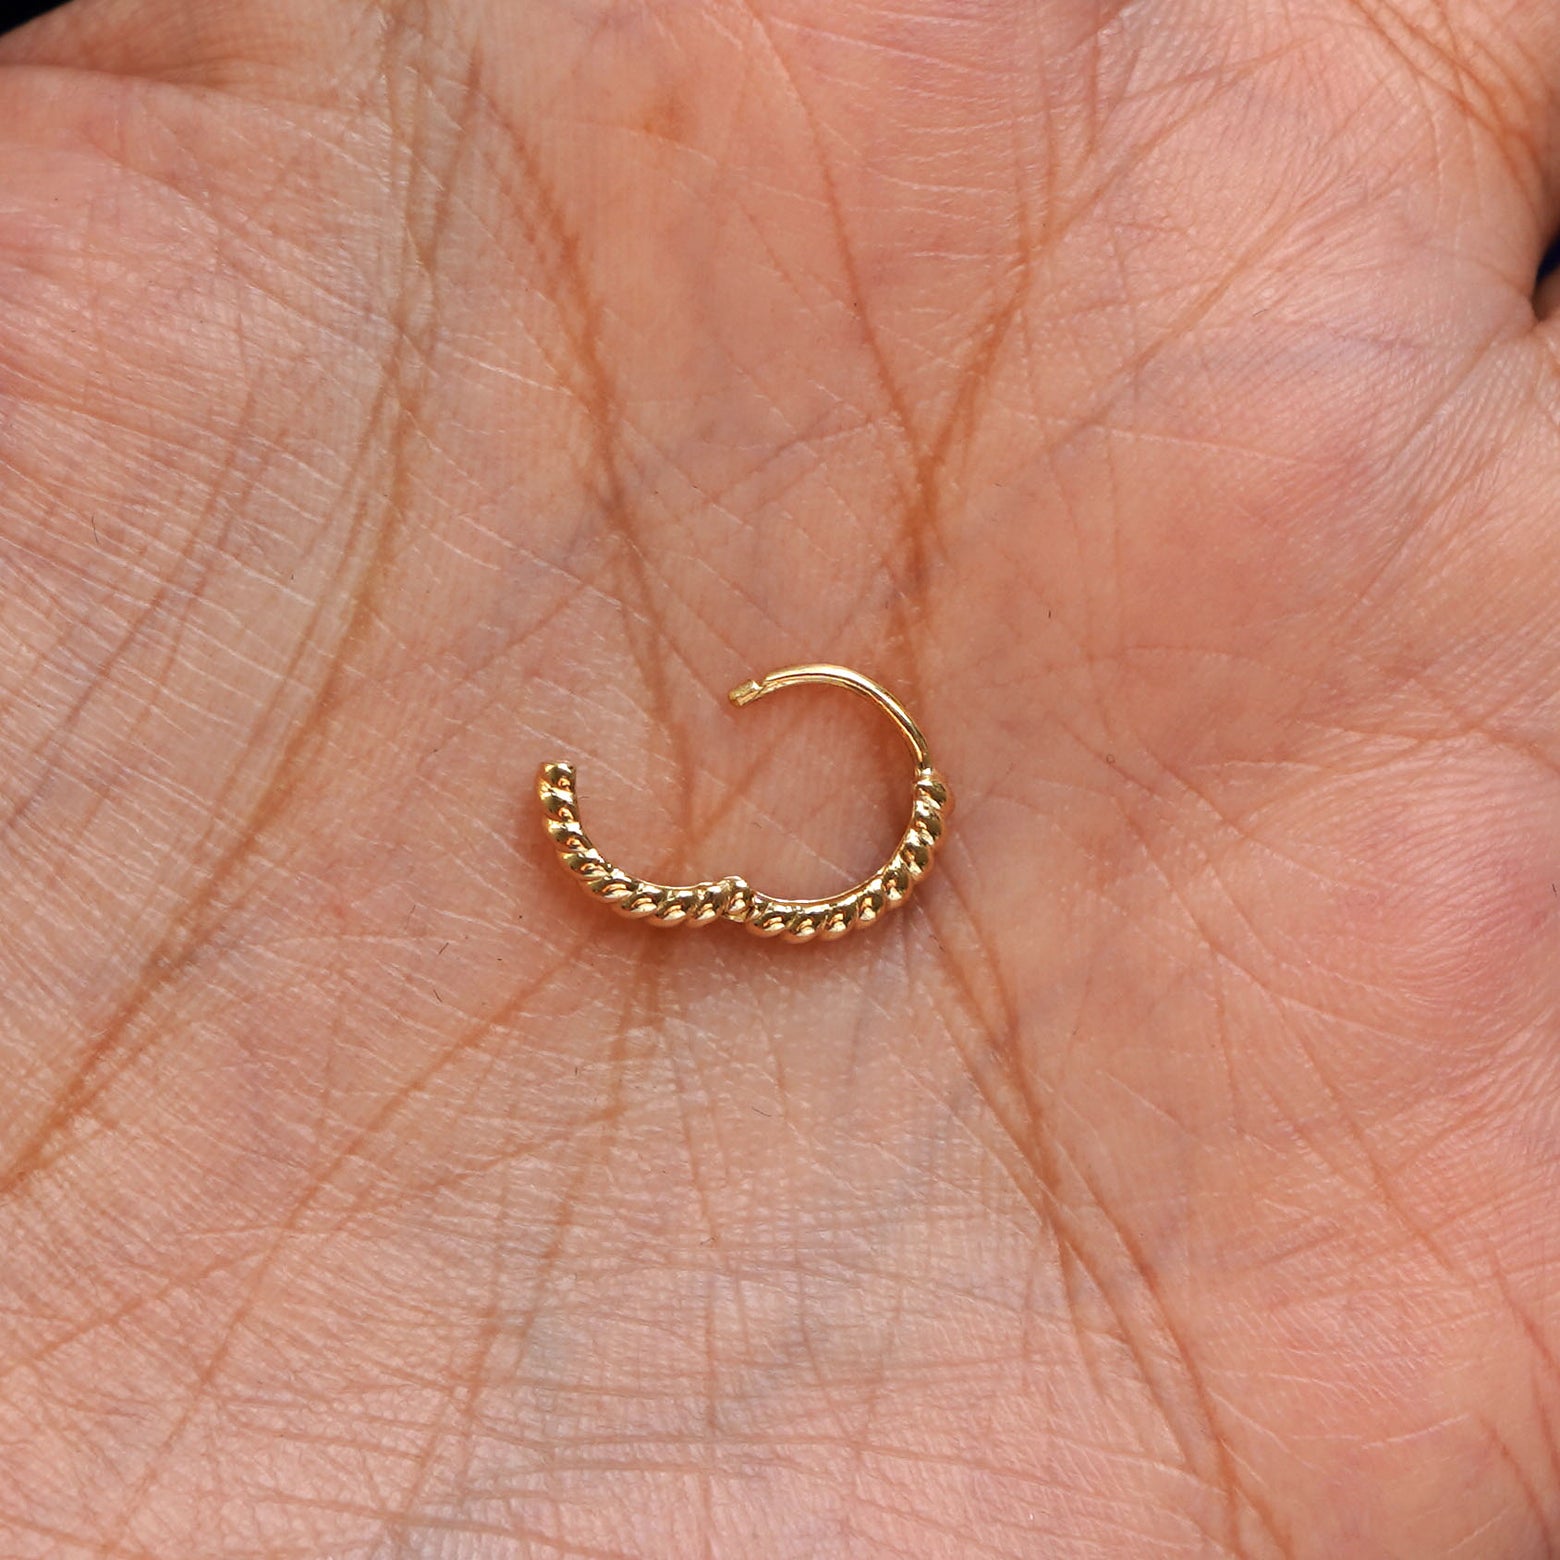 A solid 14k yellow gold Mini Rope Huggie Hoop Earring open in a model's palm to show the hinge